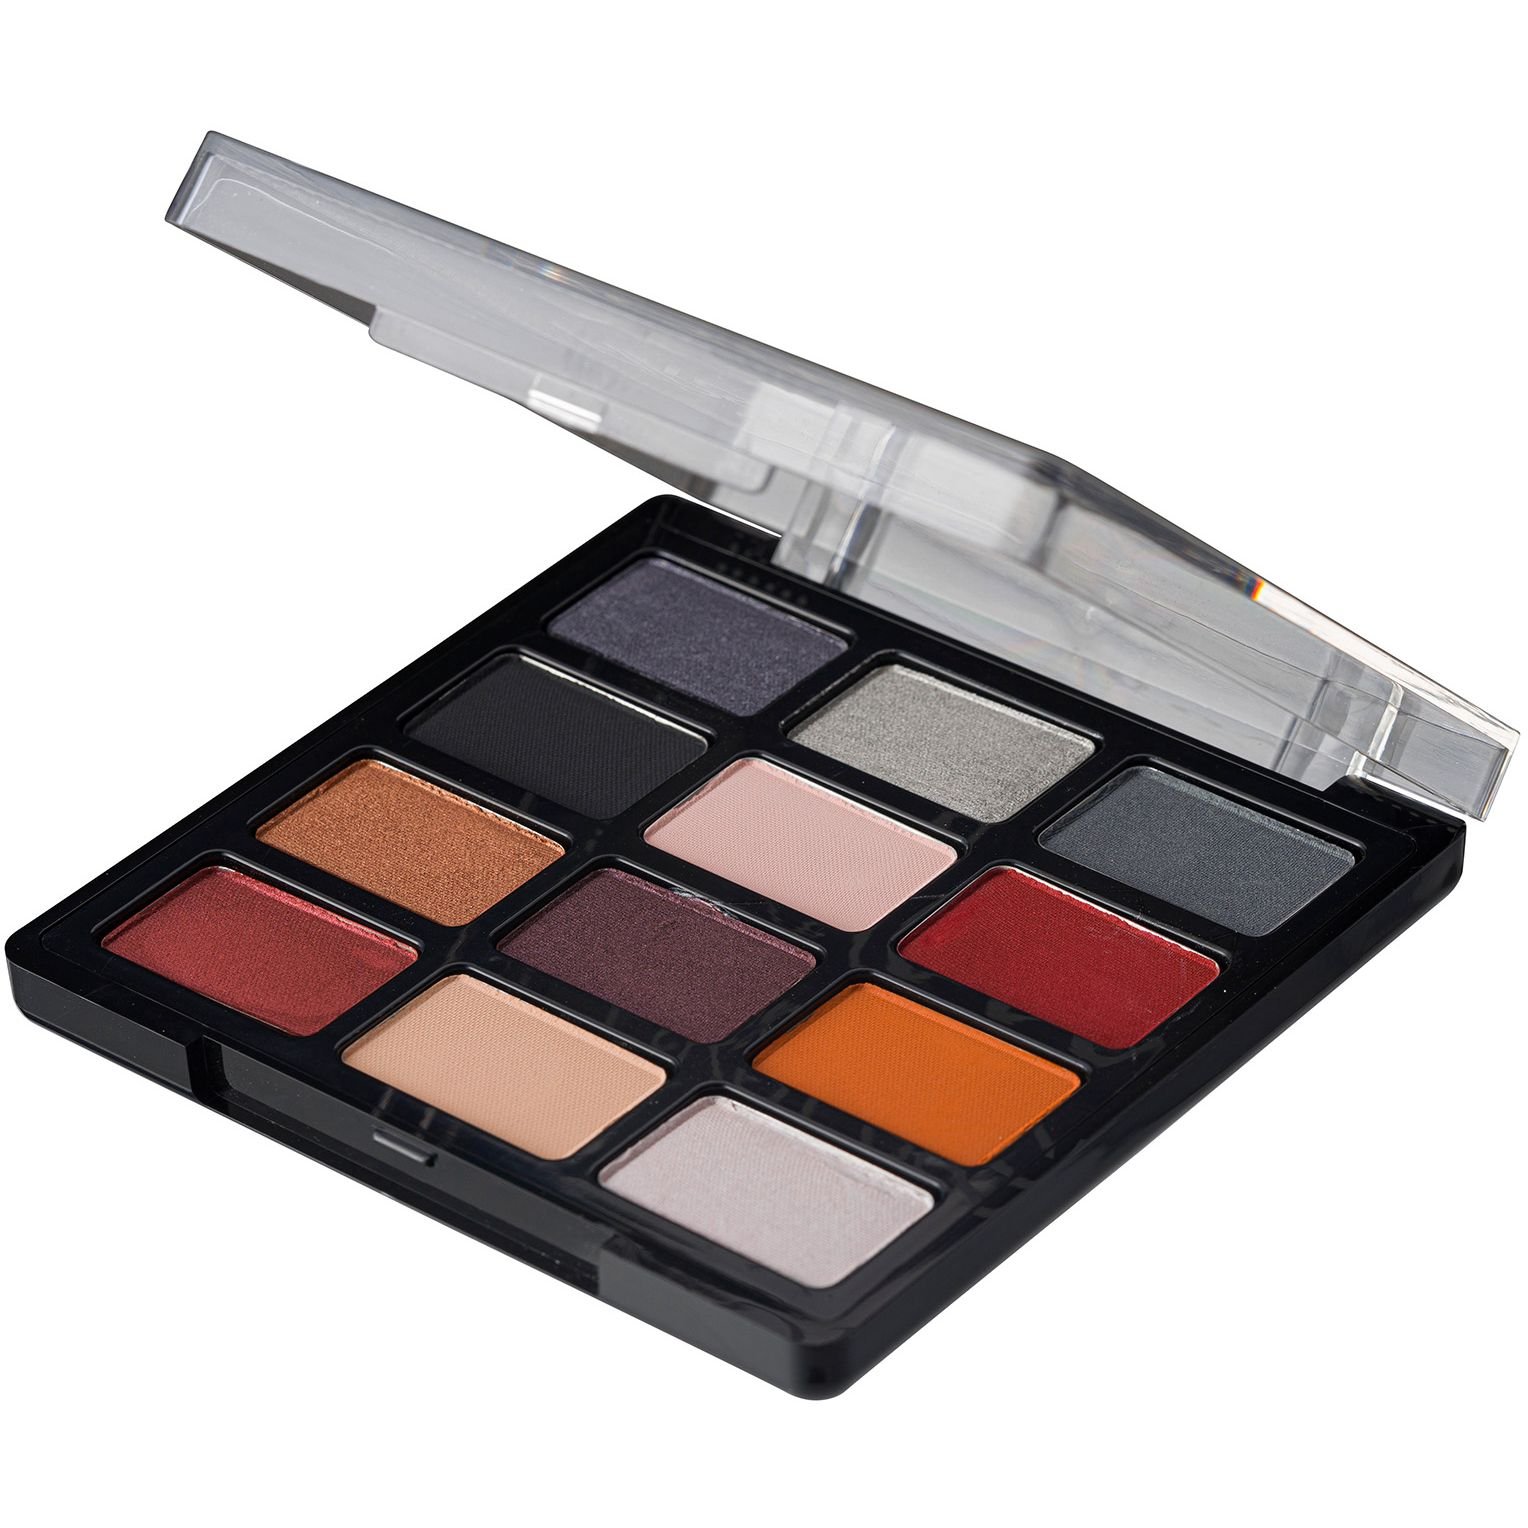 Палетка теней Note Cosmetique Love At First Sight Eyeshadow Palette тон 203 (Freedom to Be) 15.6 г - фото 2